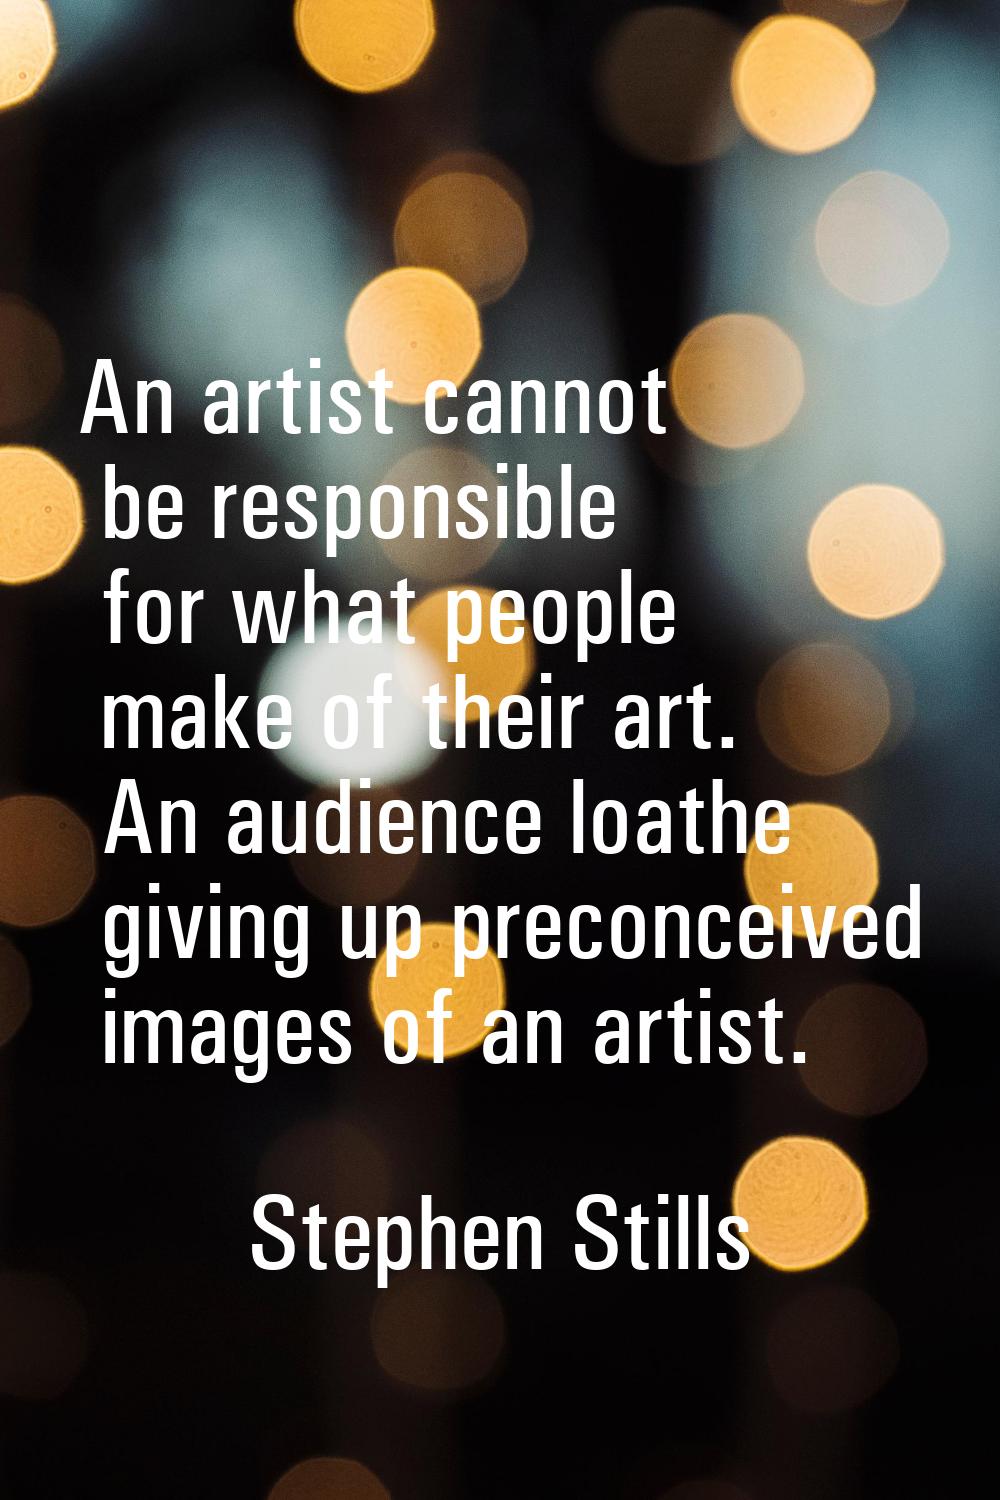 An artist cannot be responsible for what people make of their art. An audience loathe giving up pre